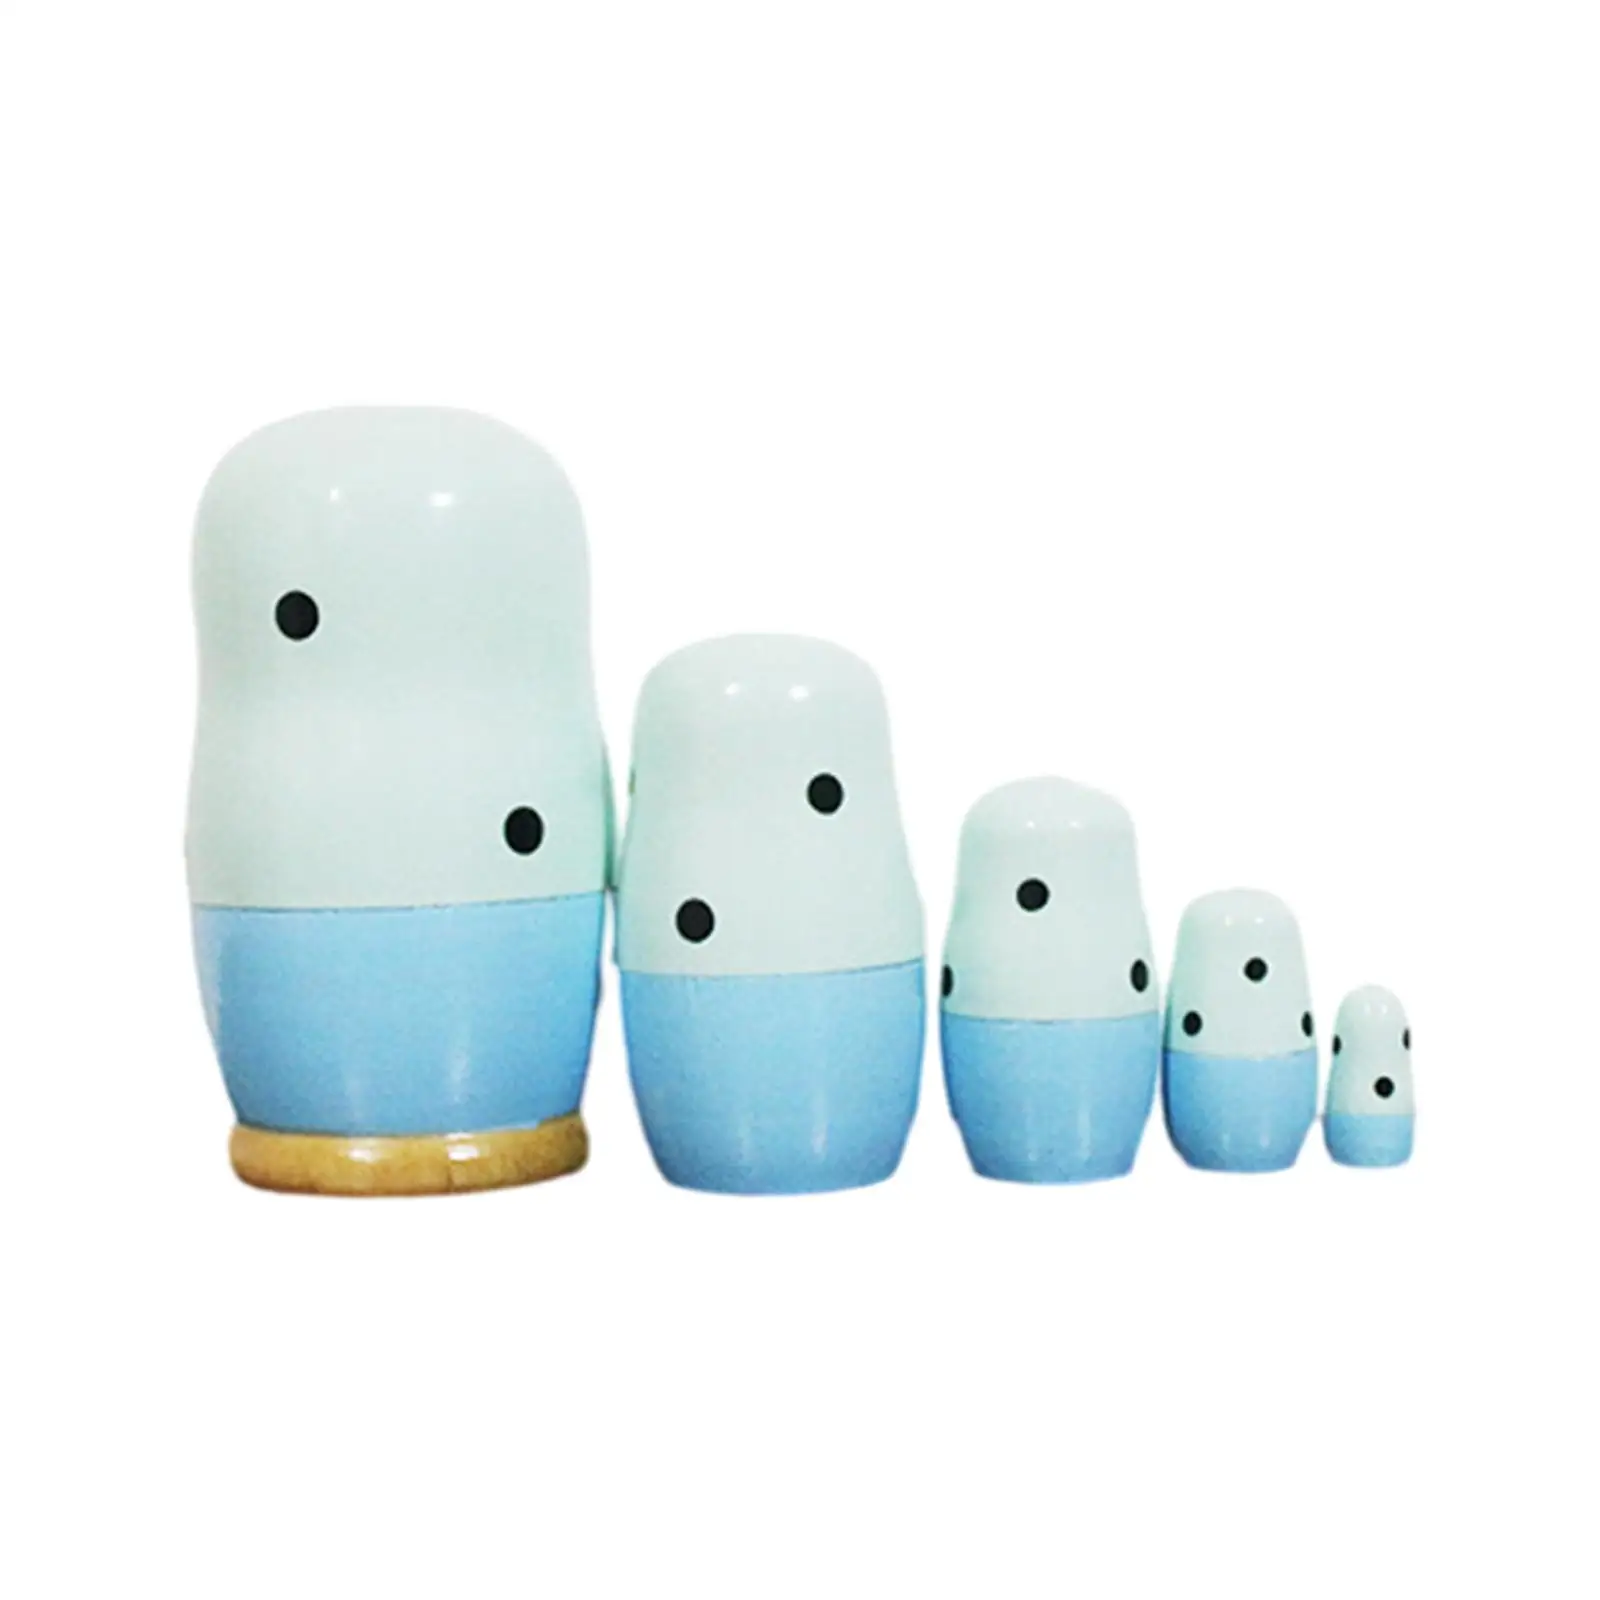 5 Pieces Nesting Dolls Kids Gifts Matryoshka Crafts for Halloween Home Kid